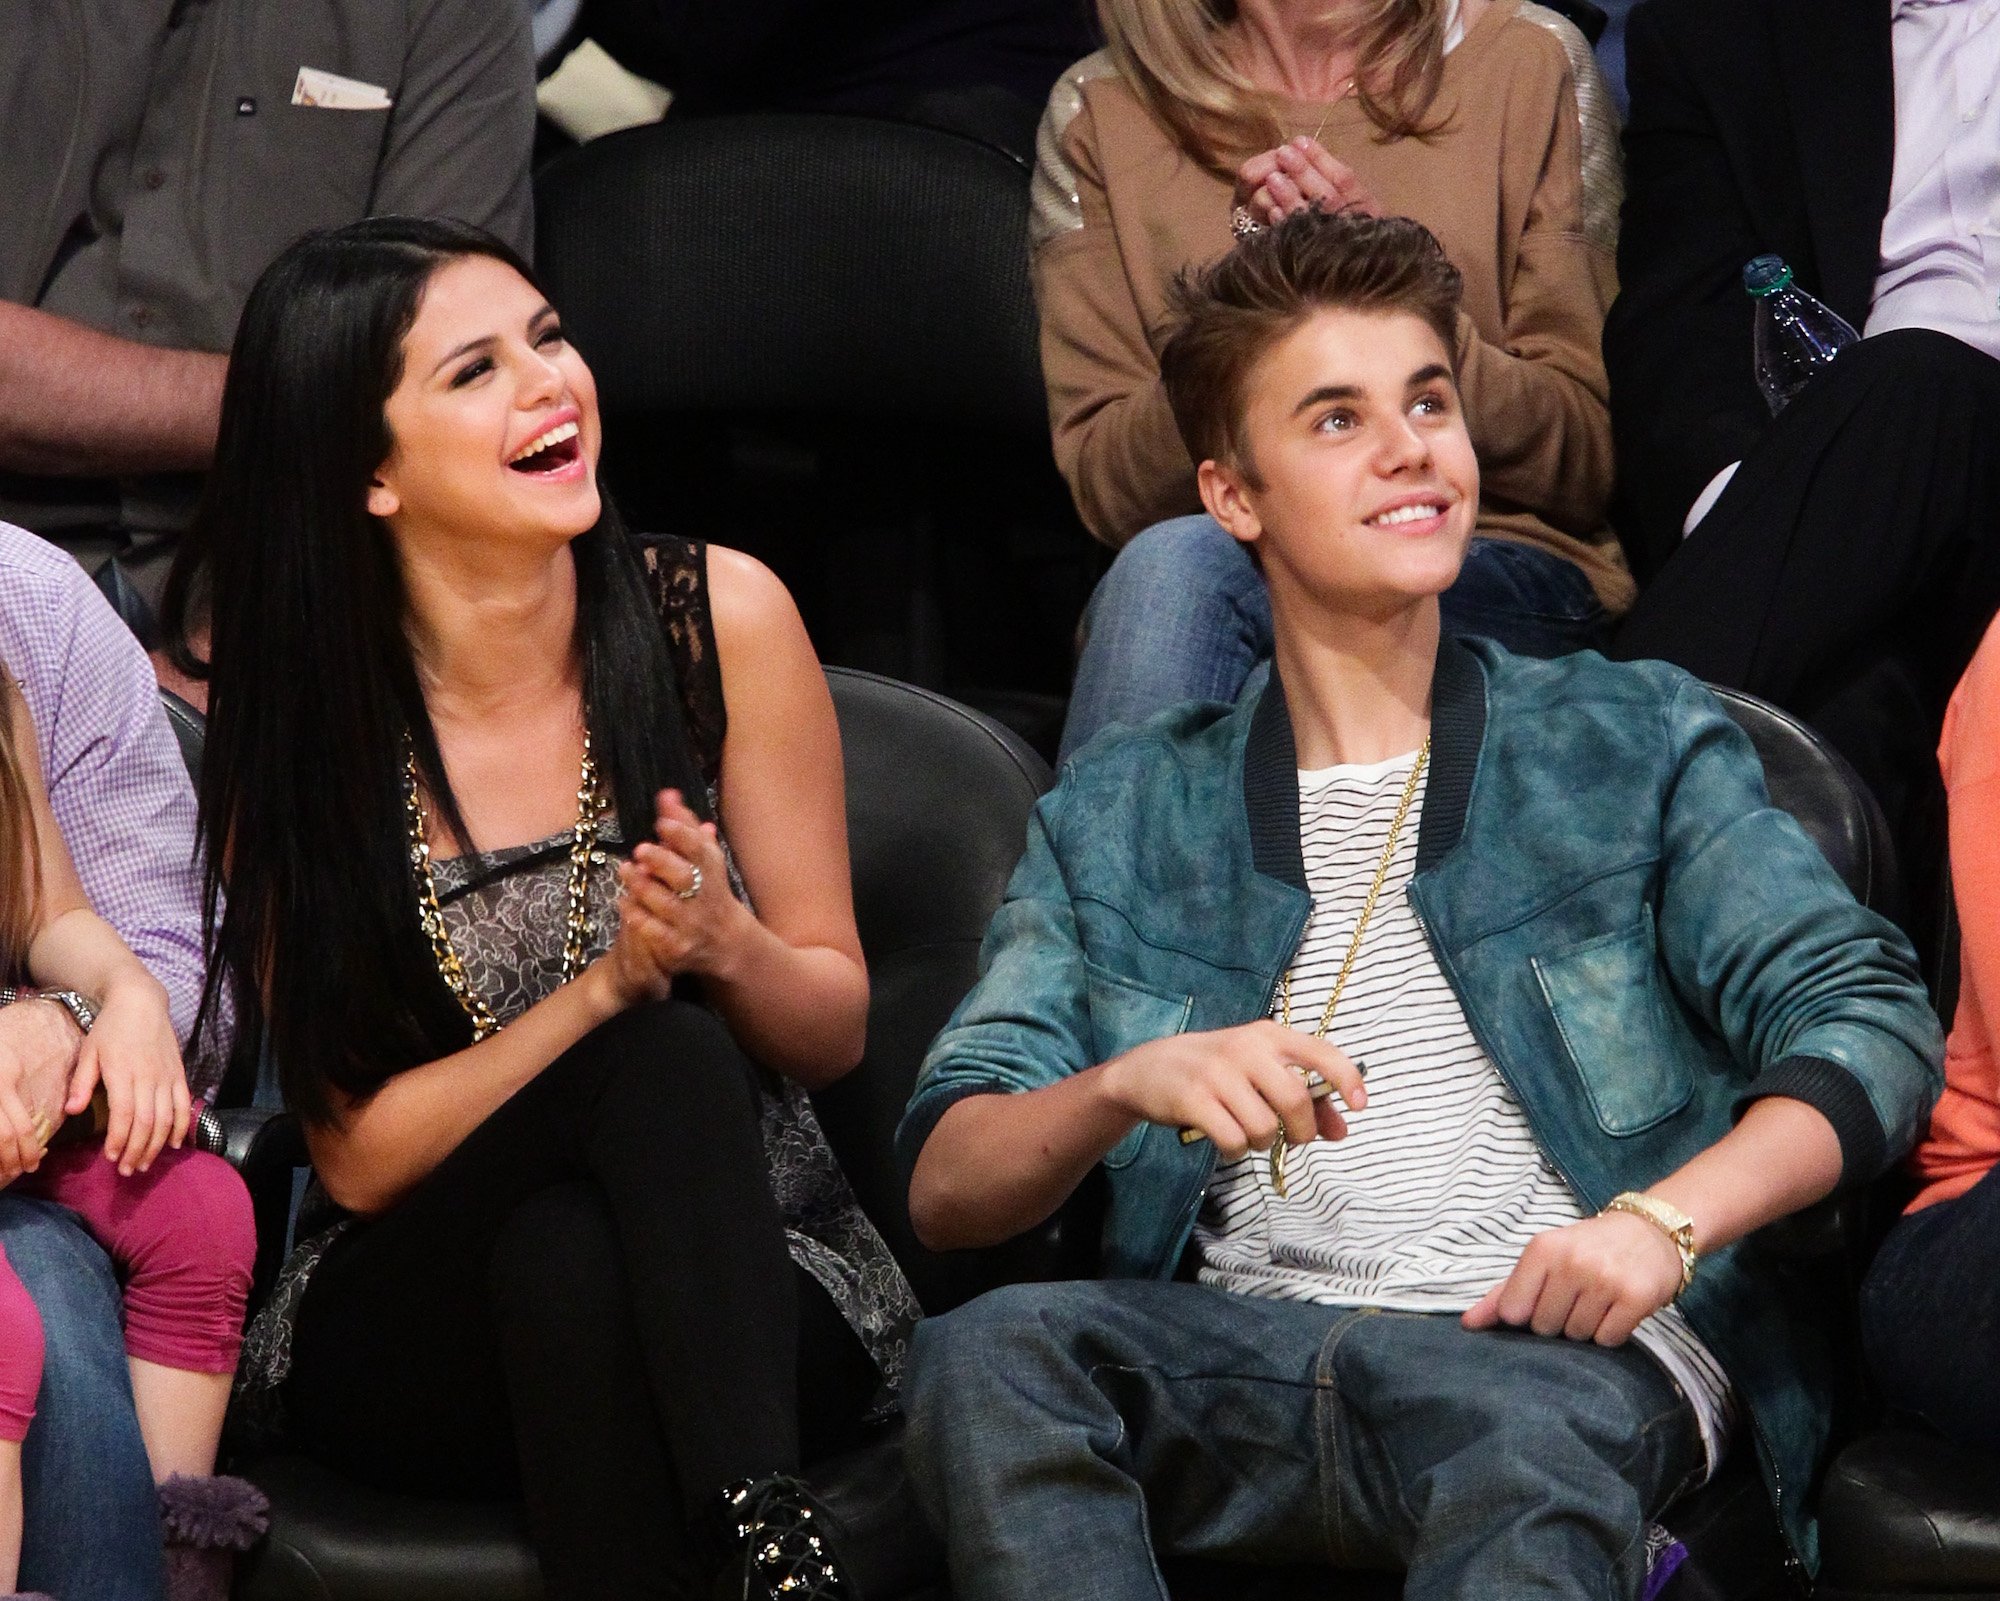 Selena Gomez and Justin Bieber attending an NBA game